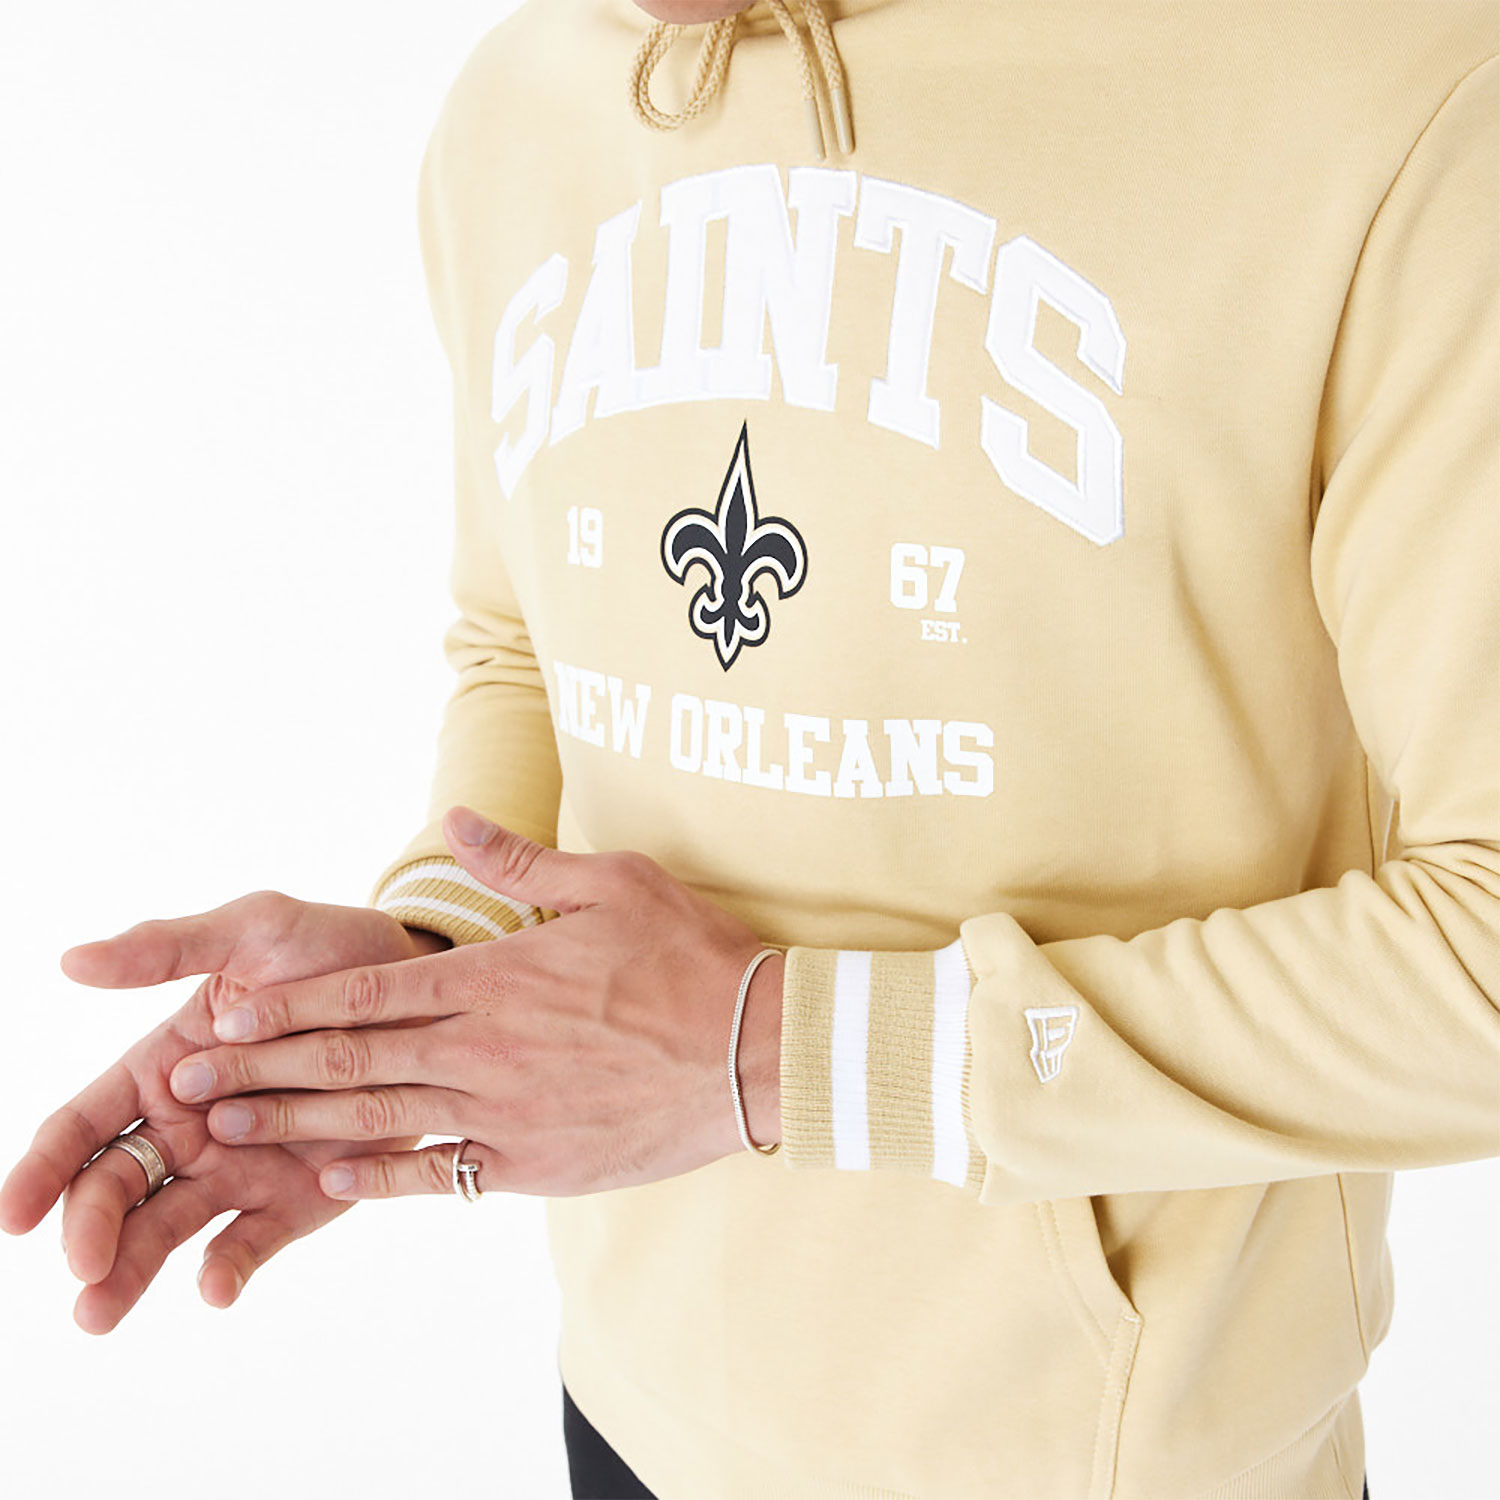 New Orleans Saints NFL Stone Oversized Pullover Hoodie